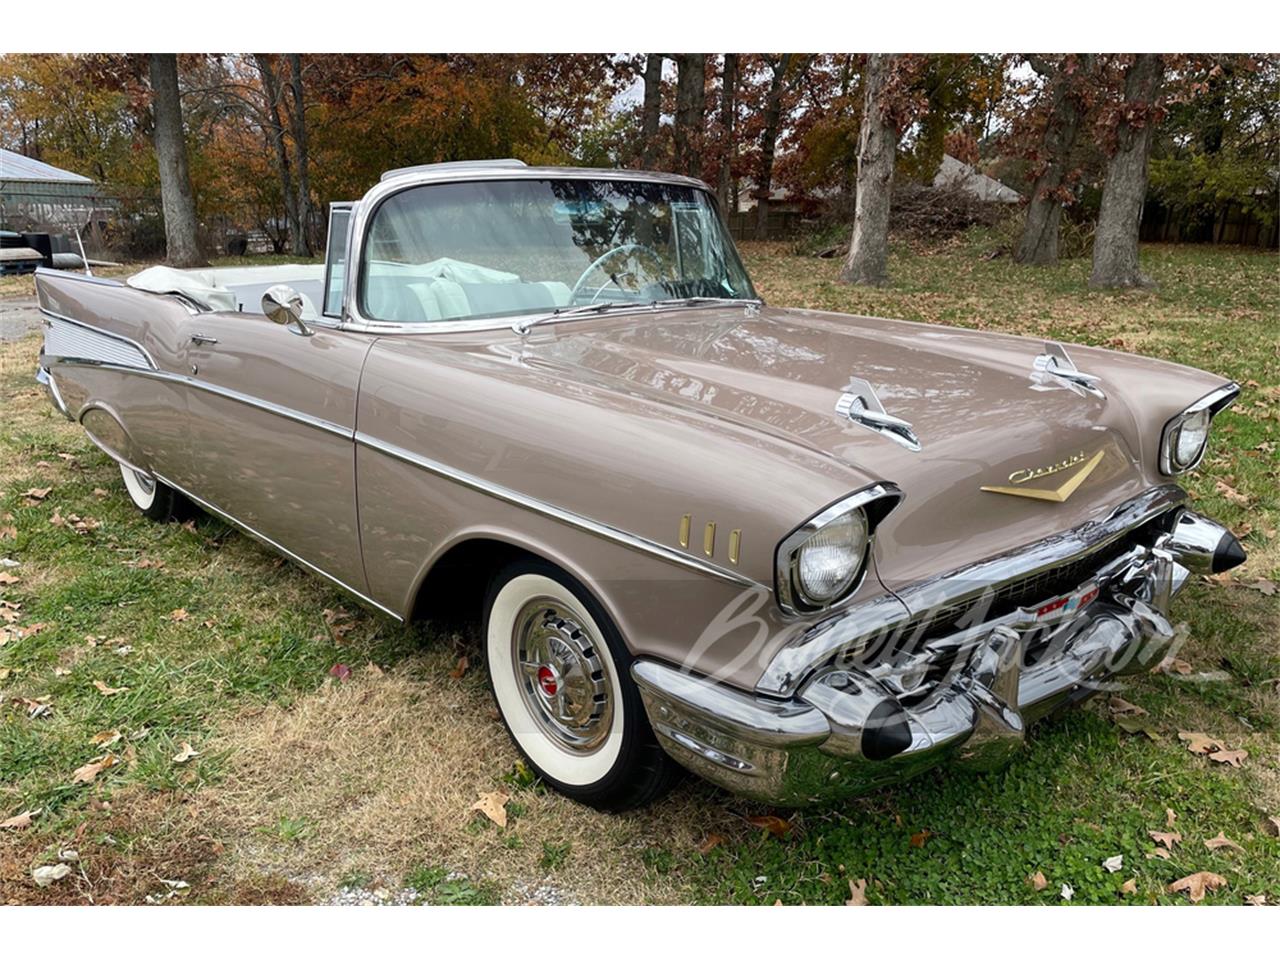 For Sale at Auction: 1957 Chevrolet Bel Air in Scottsdale, Arizona for sale in Scottsdale, AZ